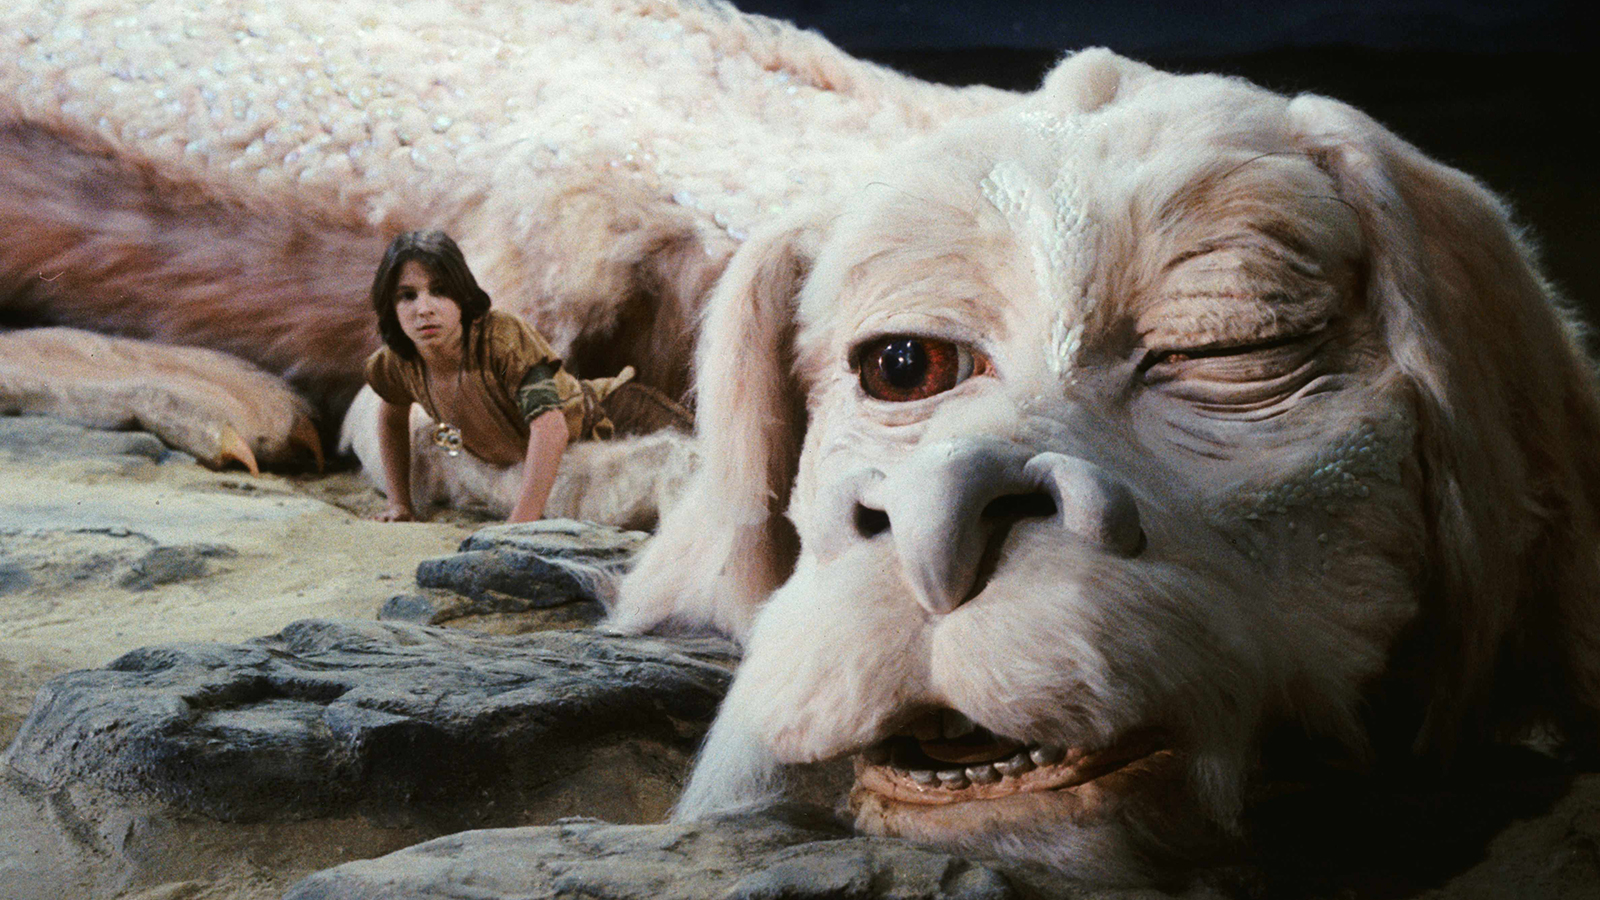 SIFF & CFC Event - The NeverEnding Story